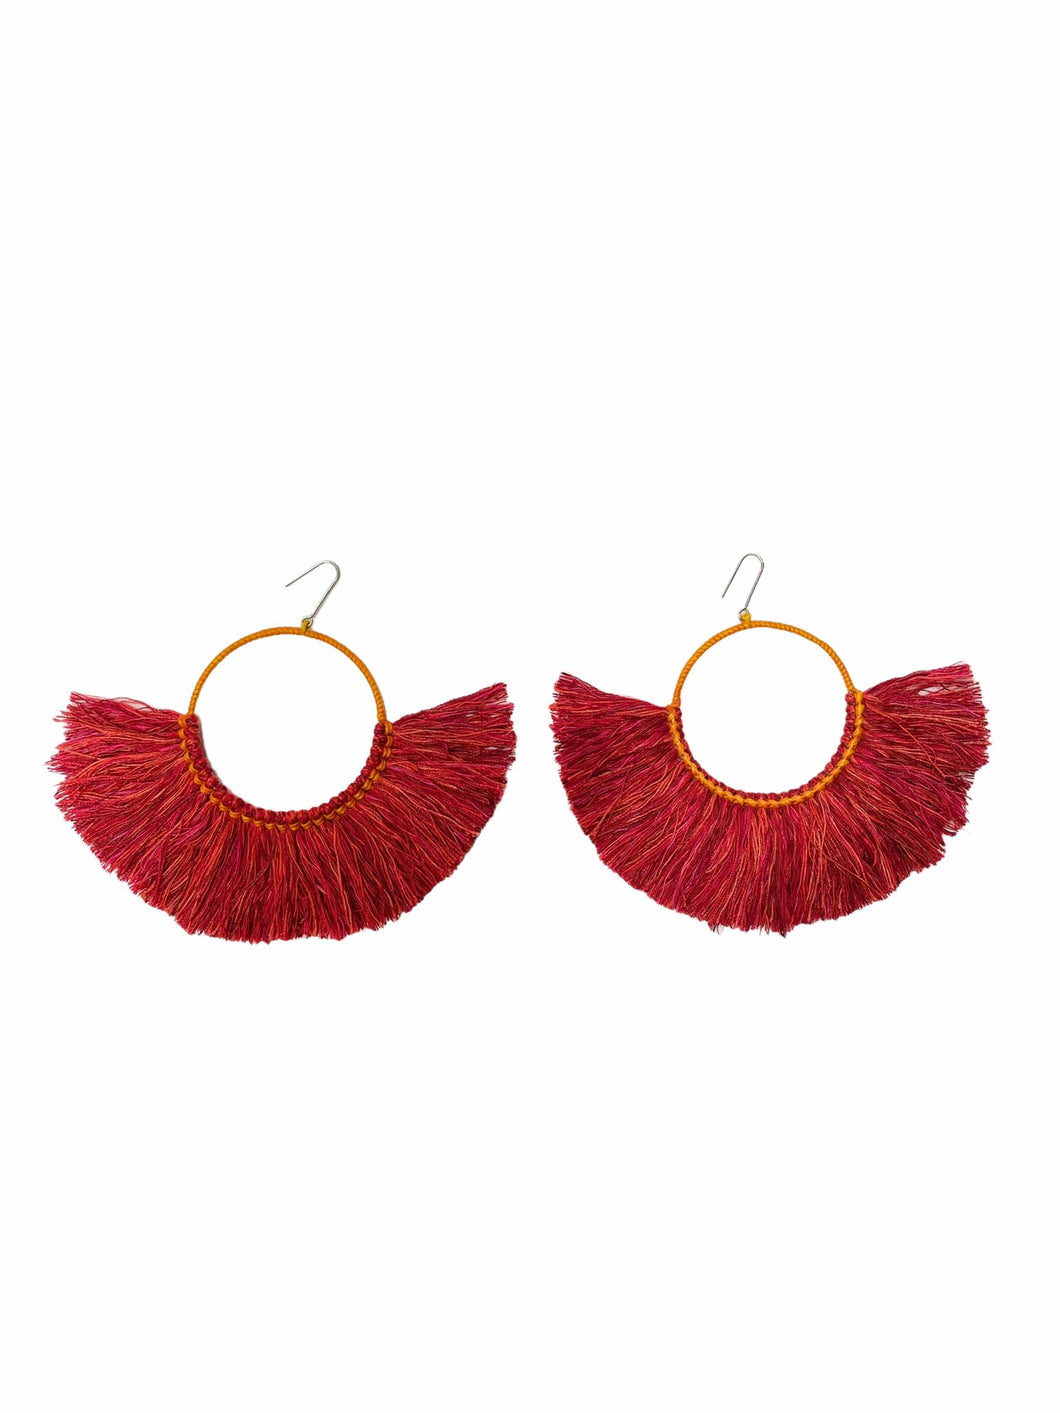 Natural Cotton Fringing  Earrings - Large